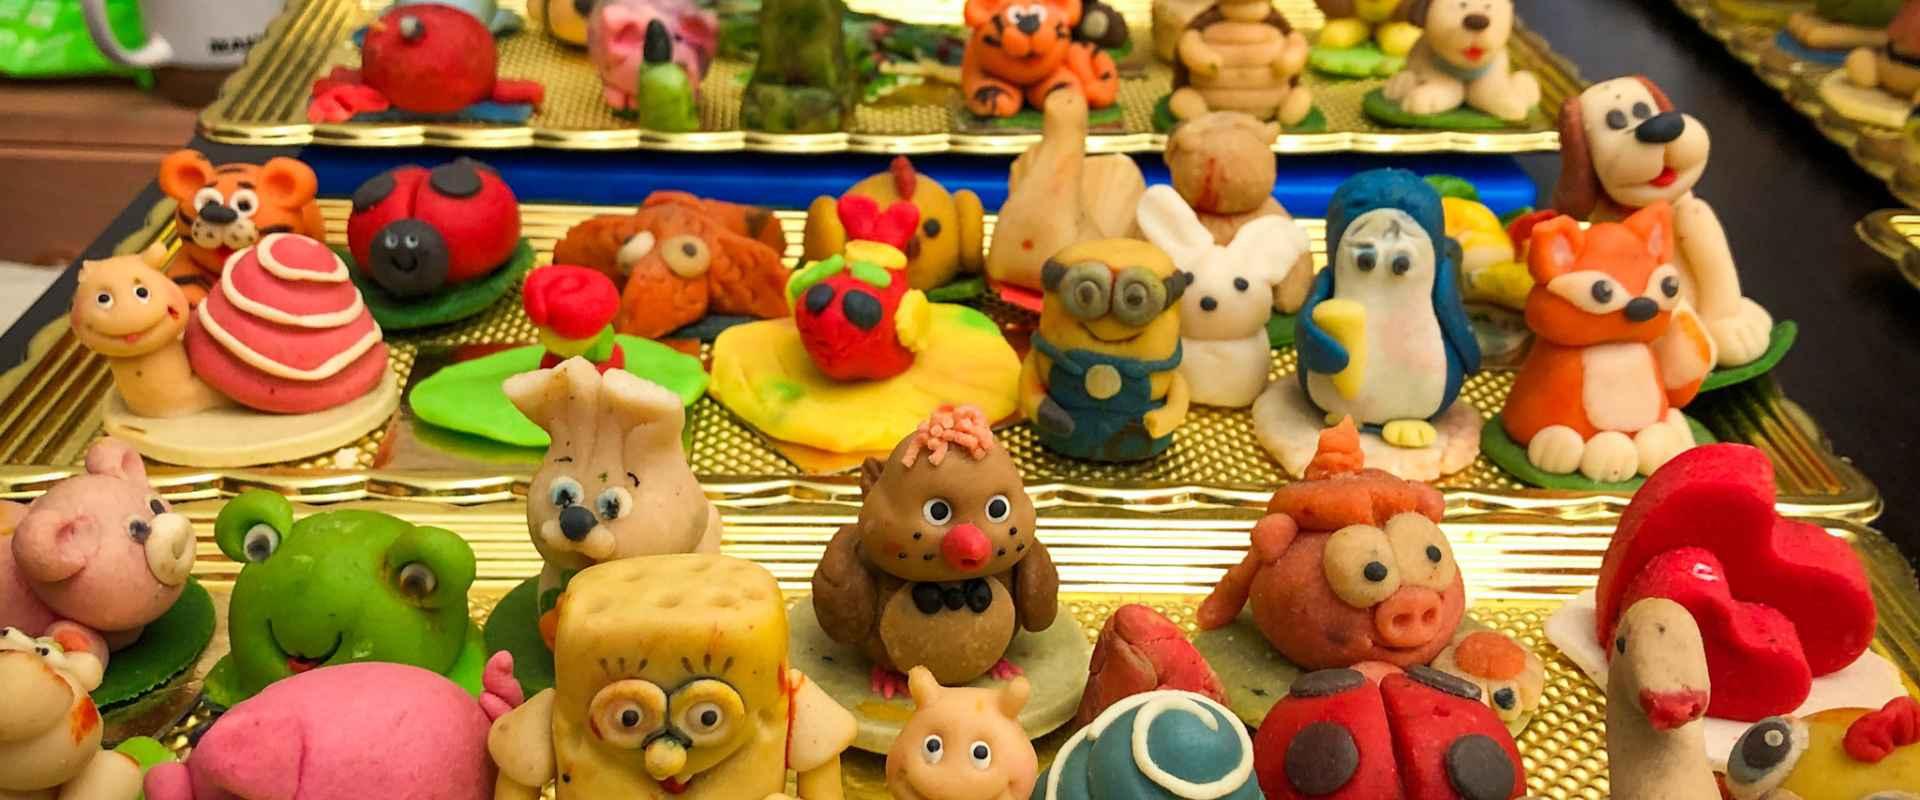 Marzipan Gallery